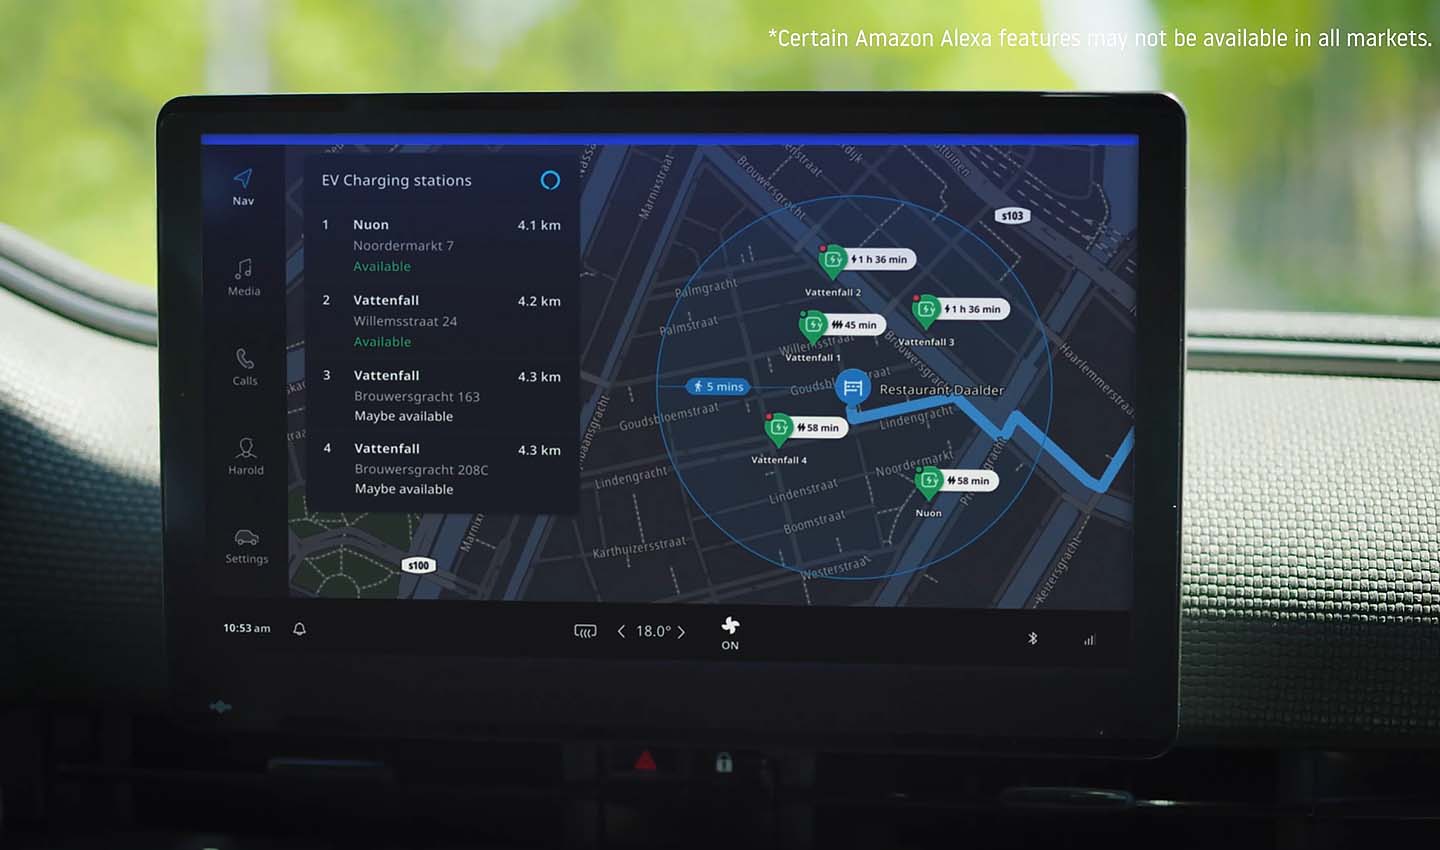 TomTom IndiGO has been designed EV first. It puts electric vehicle features, like charging station search, battery level and range, front and center. Goddijn says it gives drivers “range accuracy instead of range anxiety.”